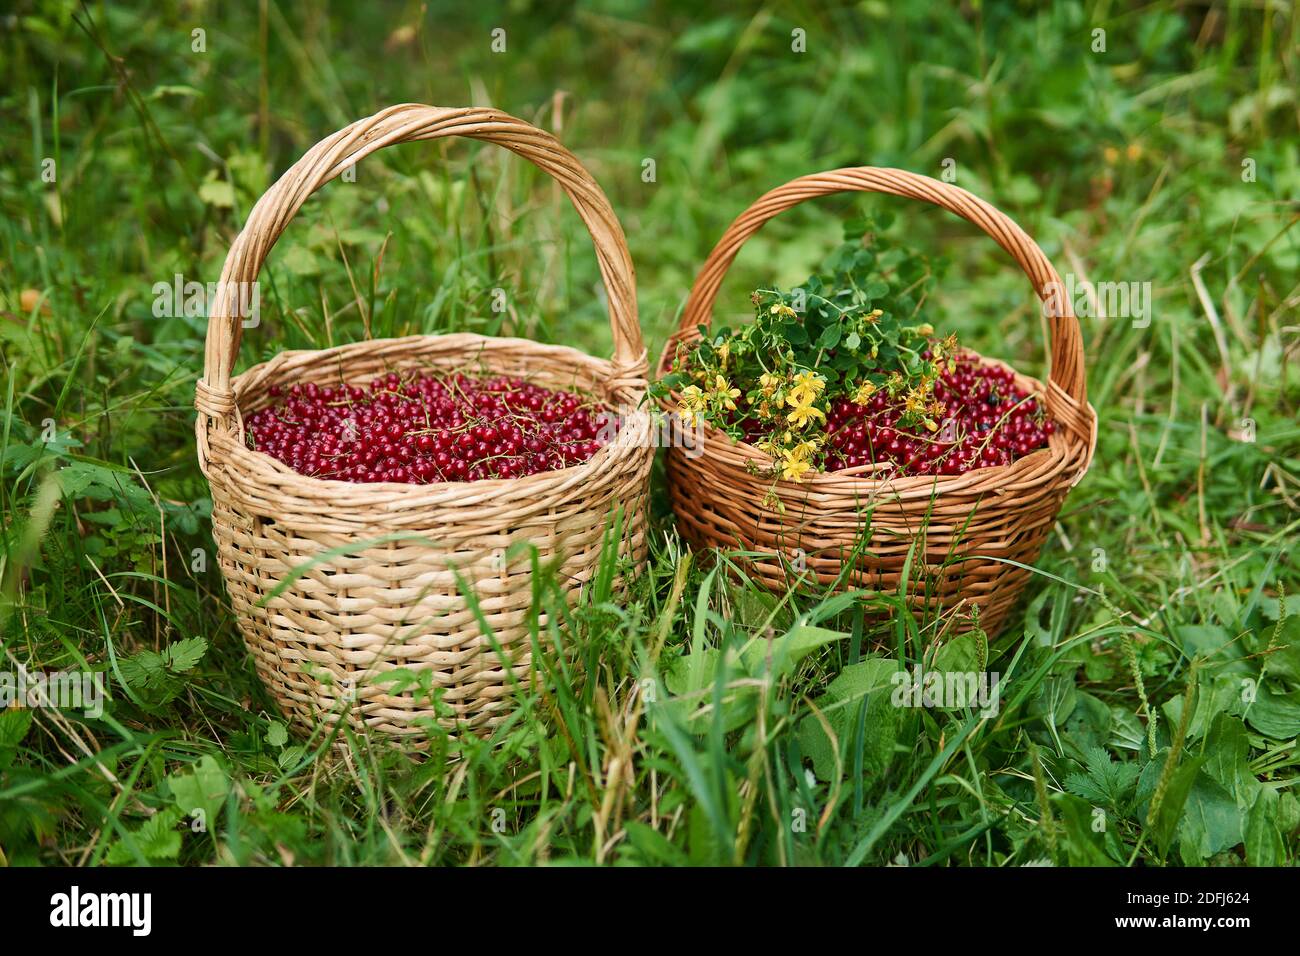 two wicker baskets full of red currant berries and a bunch of St. John's wort flowers stand in the grass Stock Photo